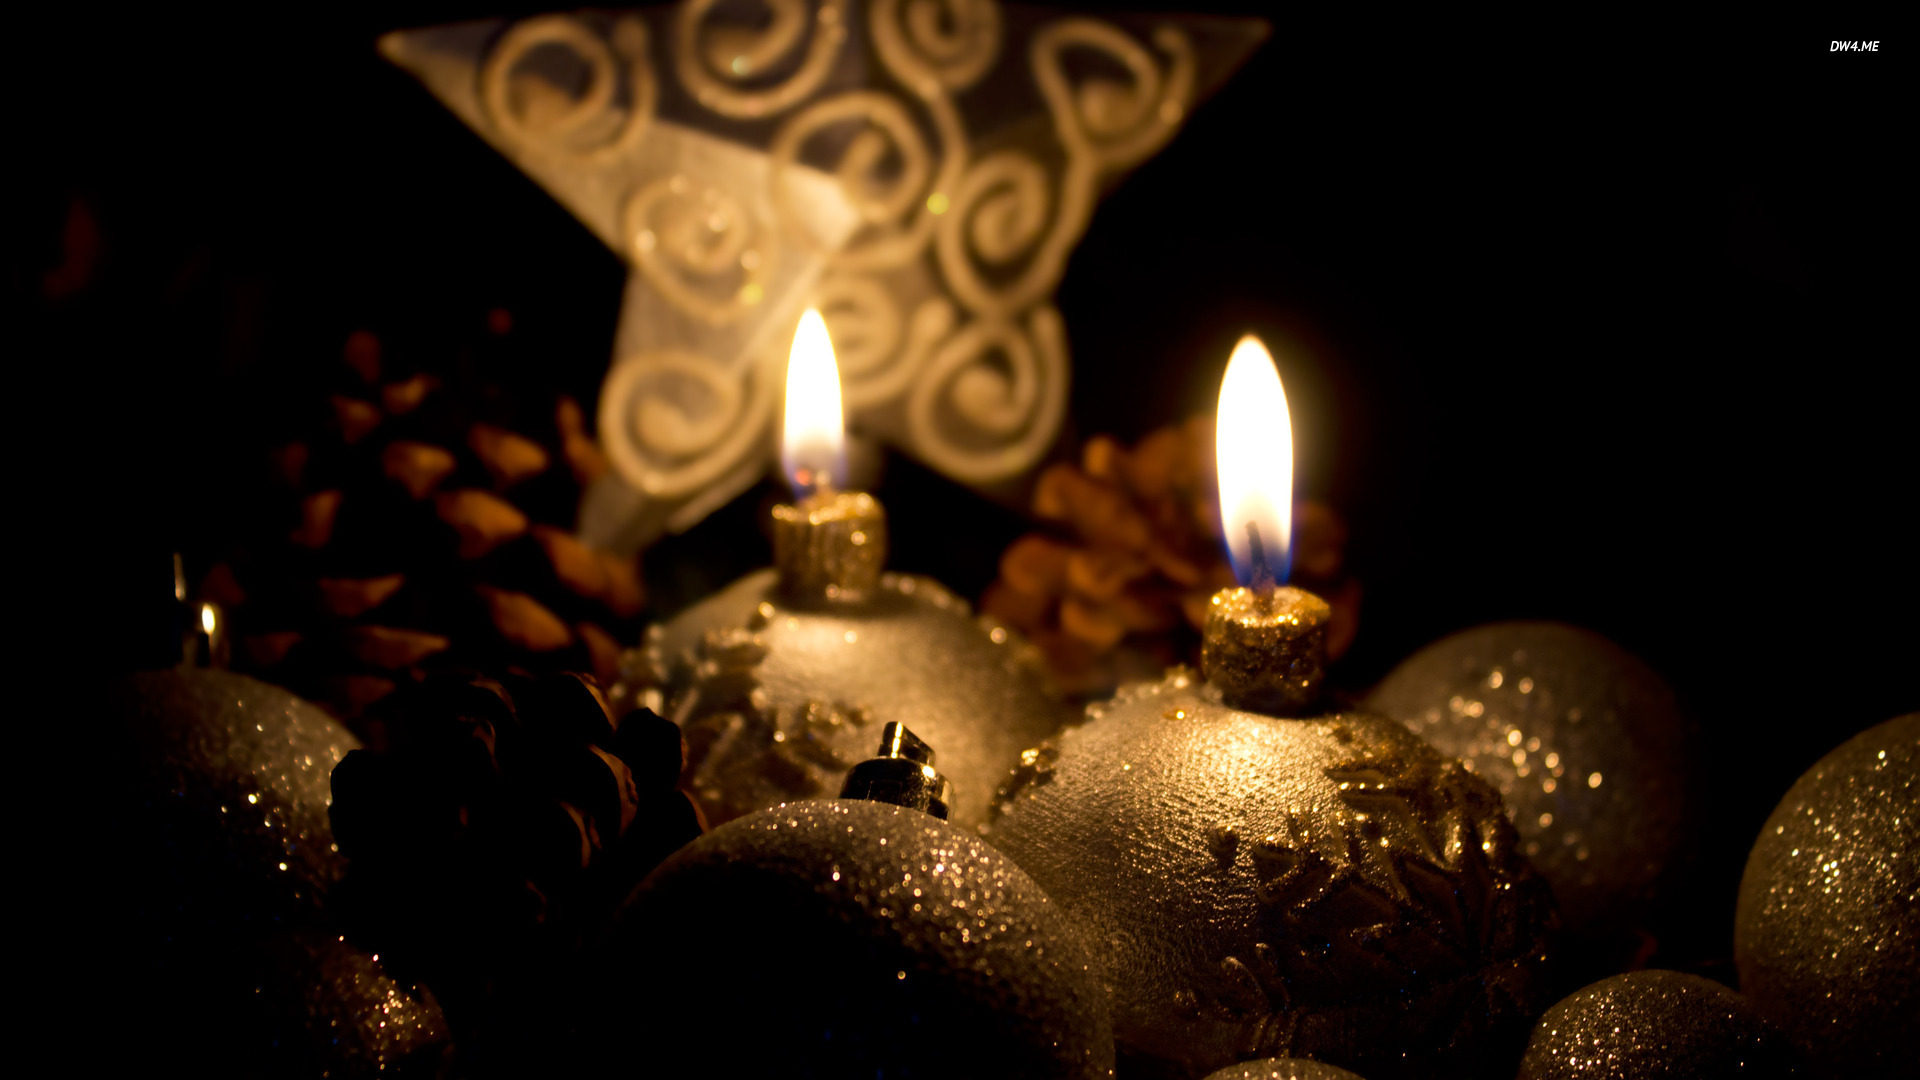 Golden Christmas candles wallpaper   Photography wallpapers   1015